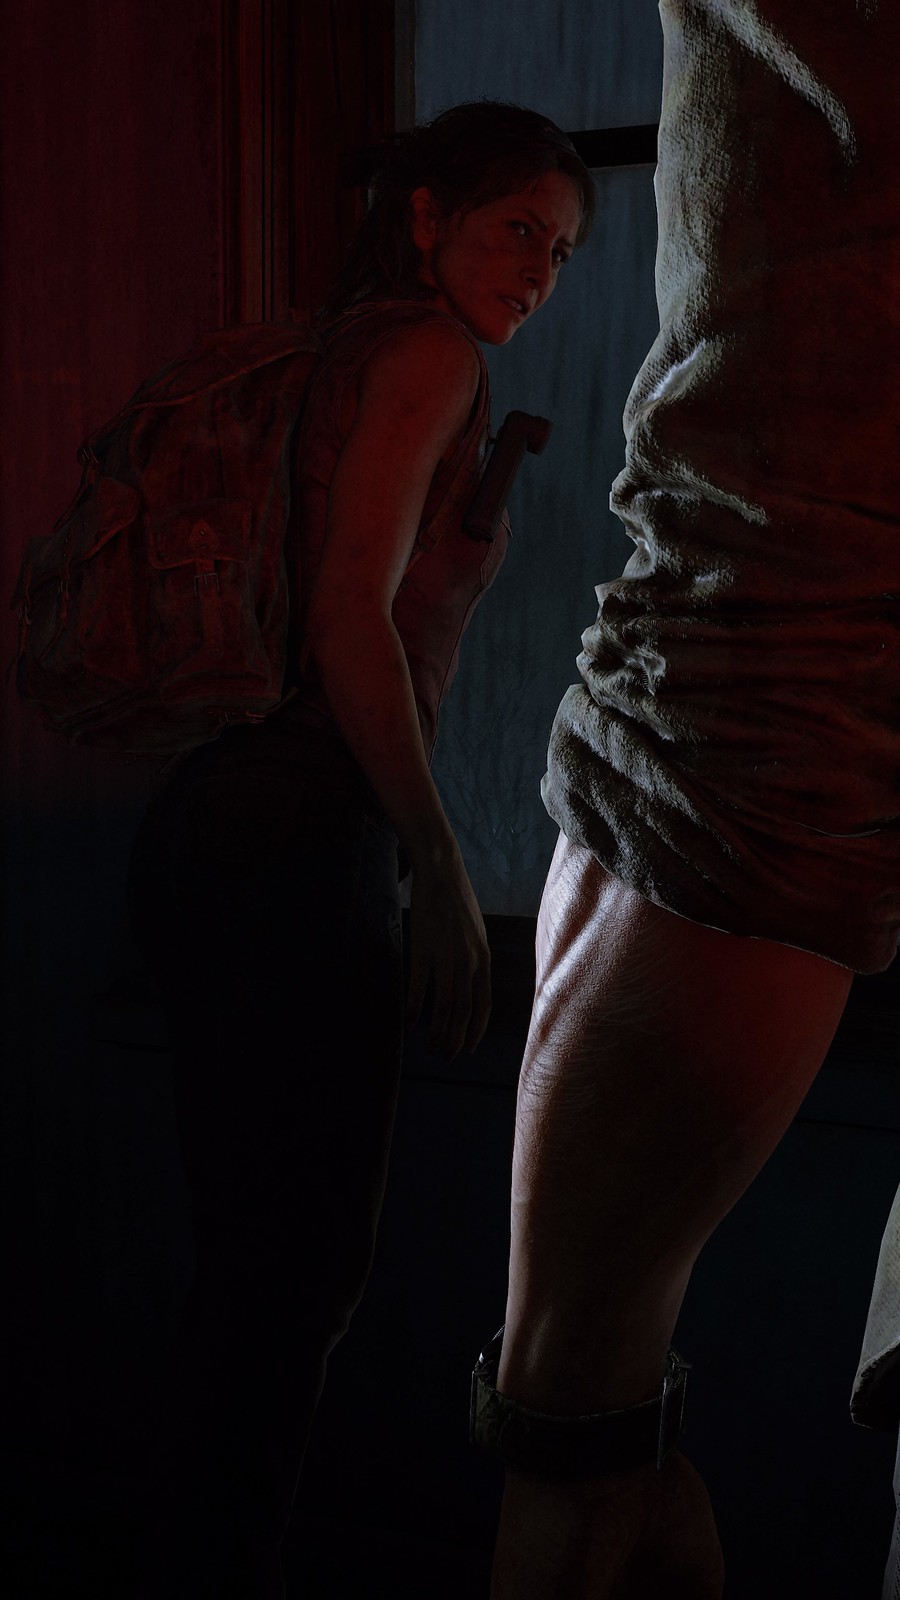 The Last of Us coming to PC on March 28: Everything you need to